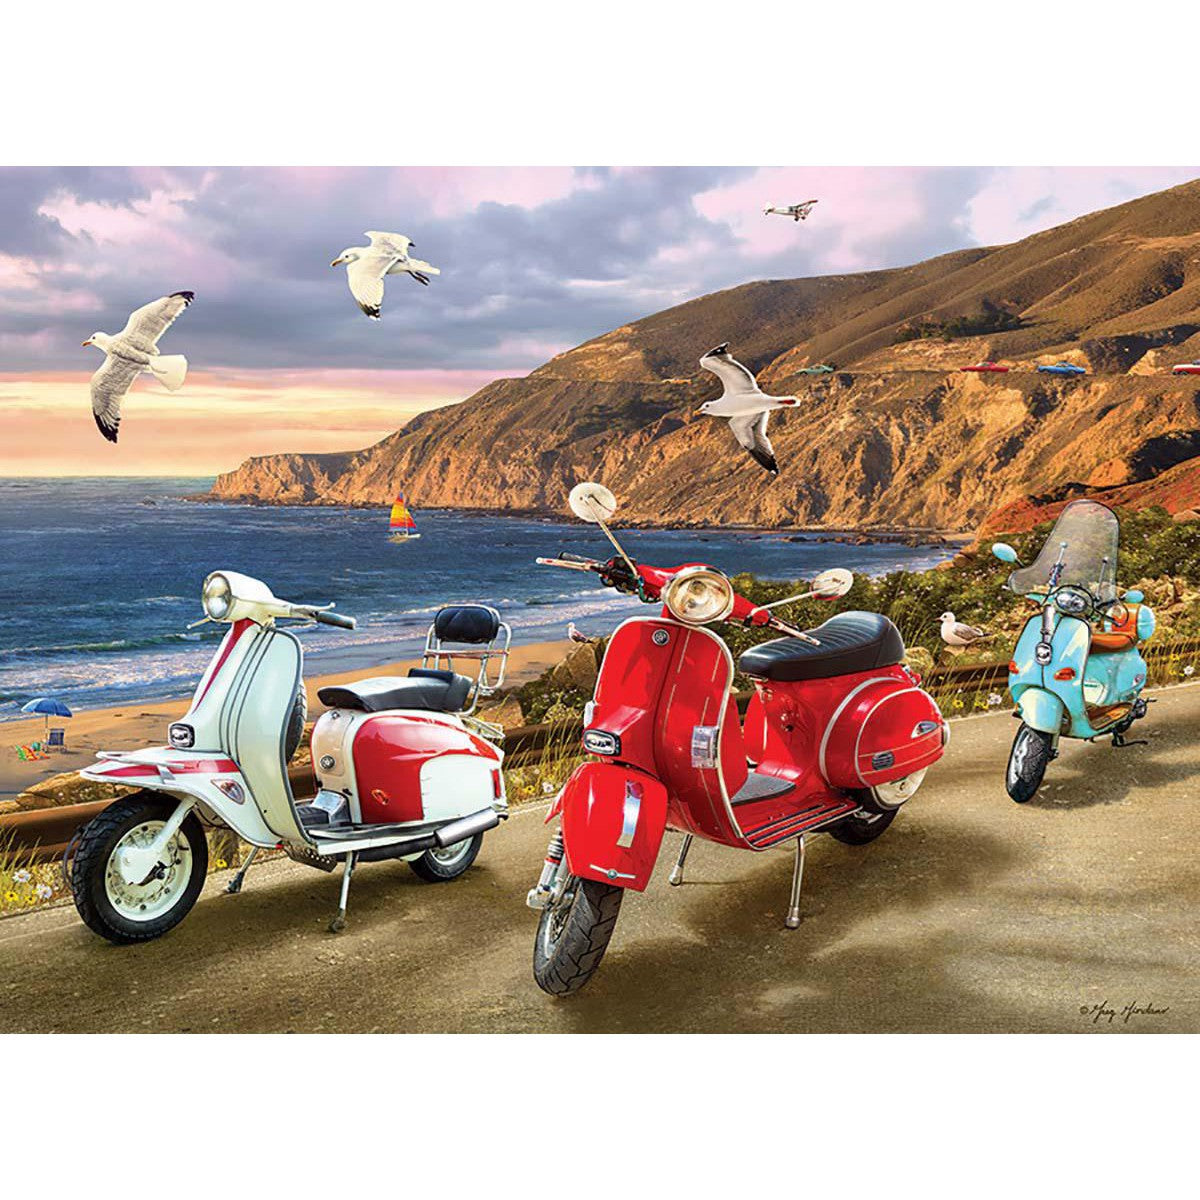 Scooters 1000 Piece Jigsaw Puzzle Cobble Hill